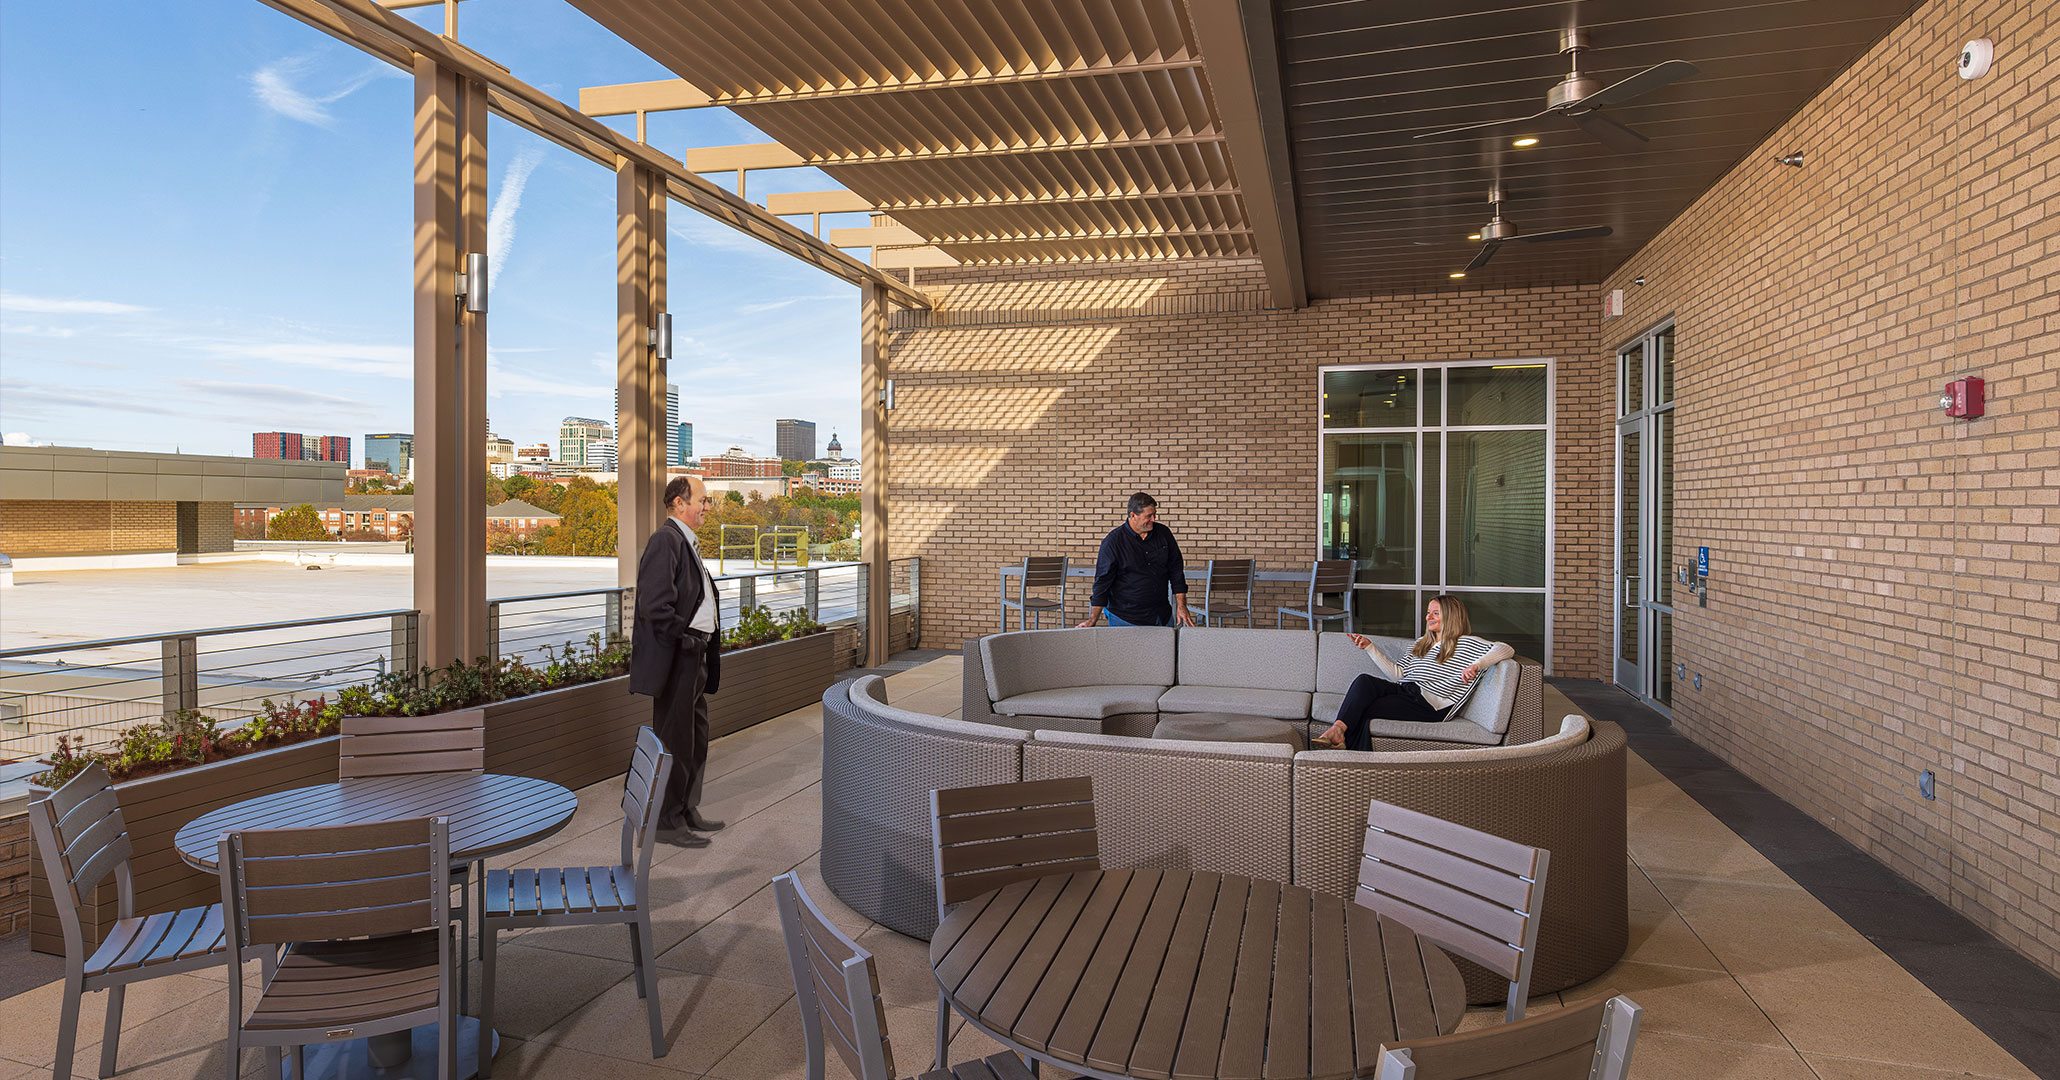 The executive patio is an outdoor party space designed by BOUDREAUX architects.